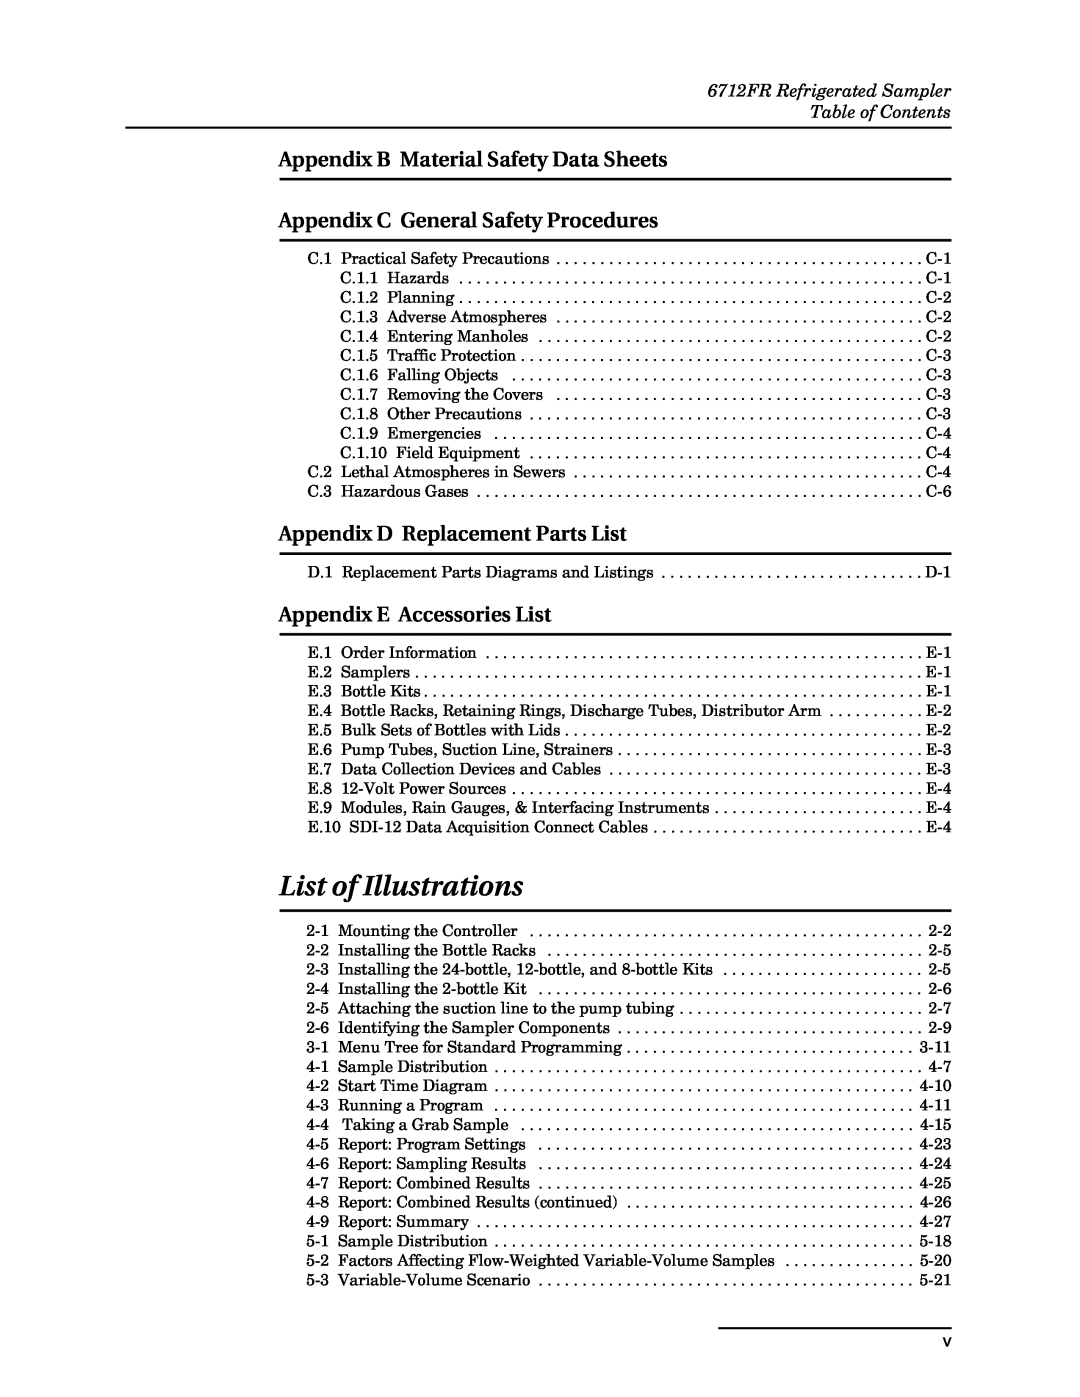 Teledyne 6712FR manual List of Illustrations, Appendix B Material Safety Data Sheets, Appendix C General Safety Procedures 